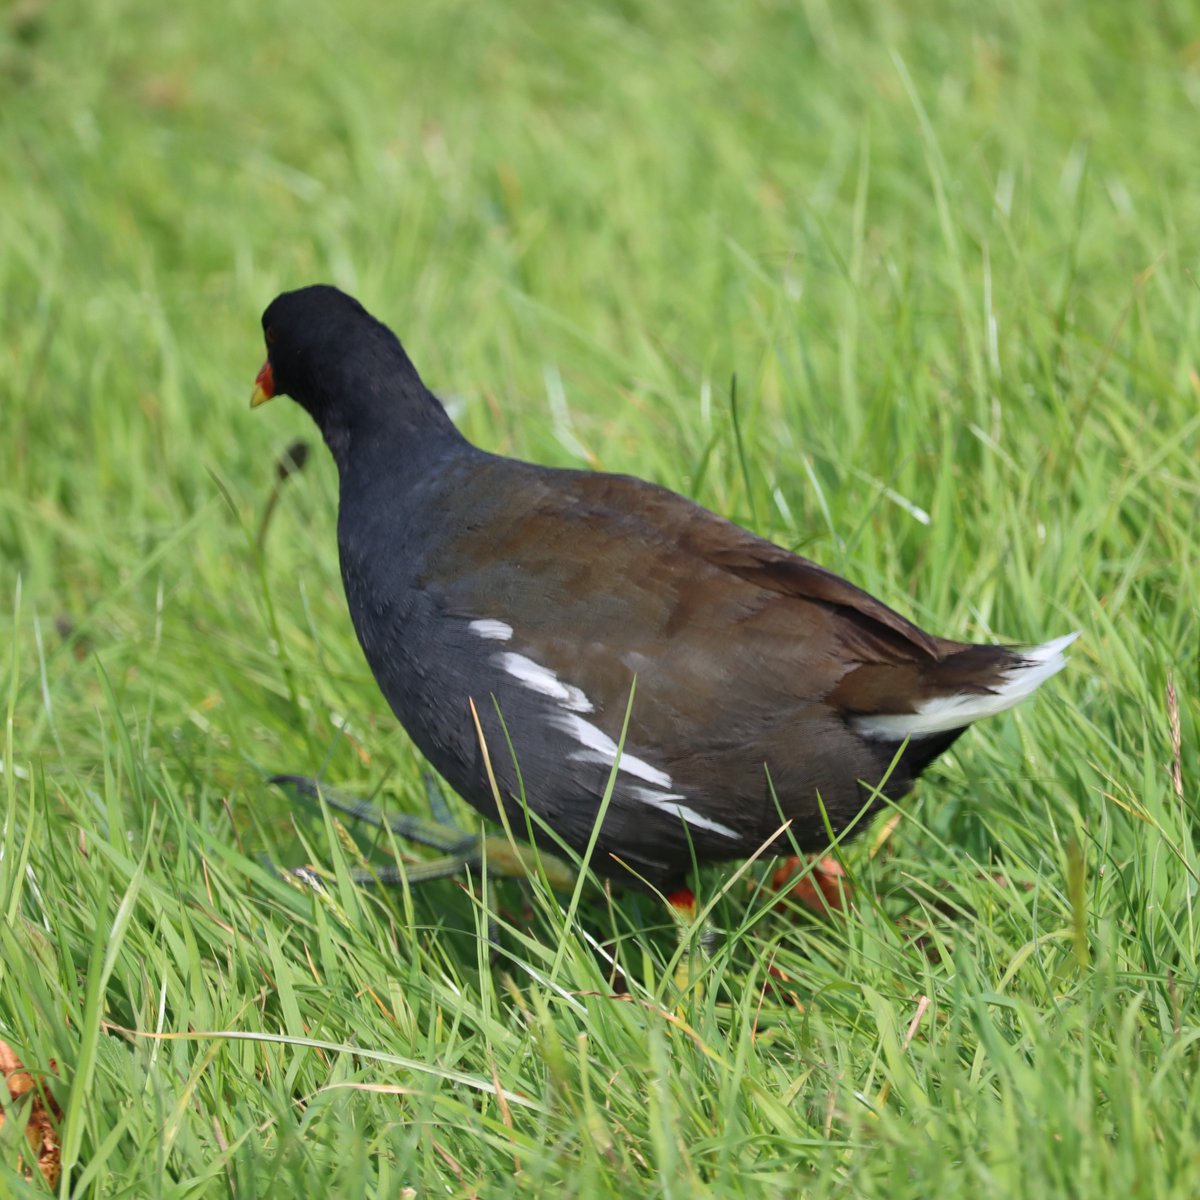 Moorhen Gallinula chloropus Cearc uisce (AKA waterhen) Resident & common on freshwater habitats including urban canals or lakes. A dark brownish bird with yellow/green long sturdy legs, a white line along the flanks, white sides to its under tail & blue-grey underneath.